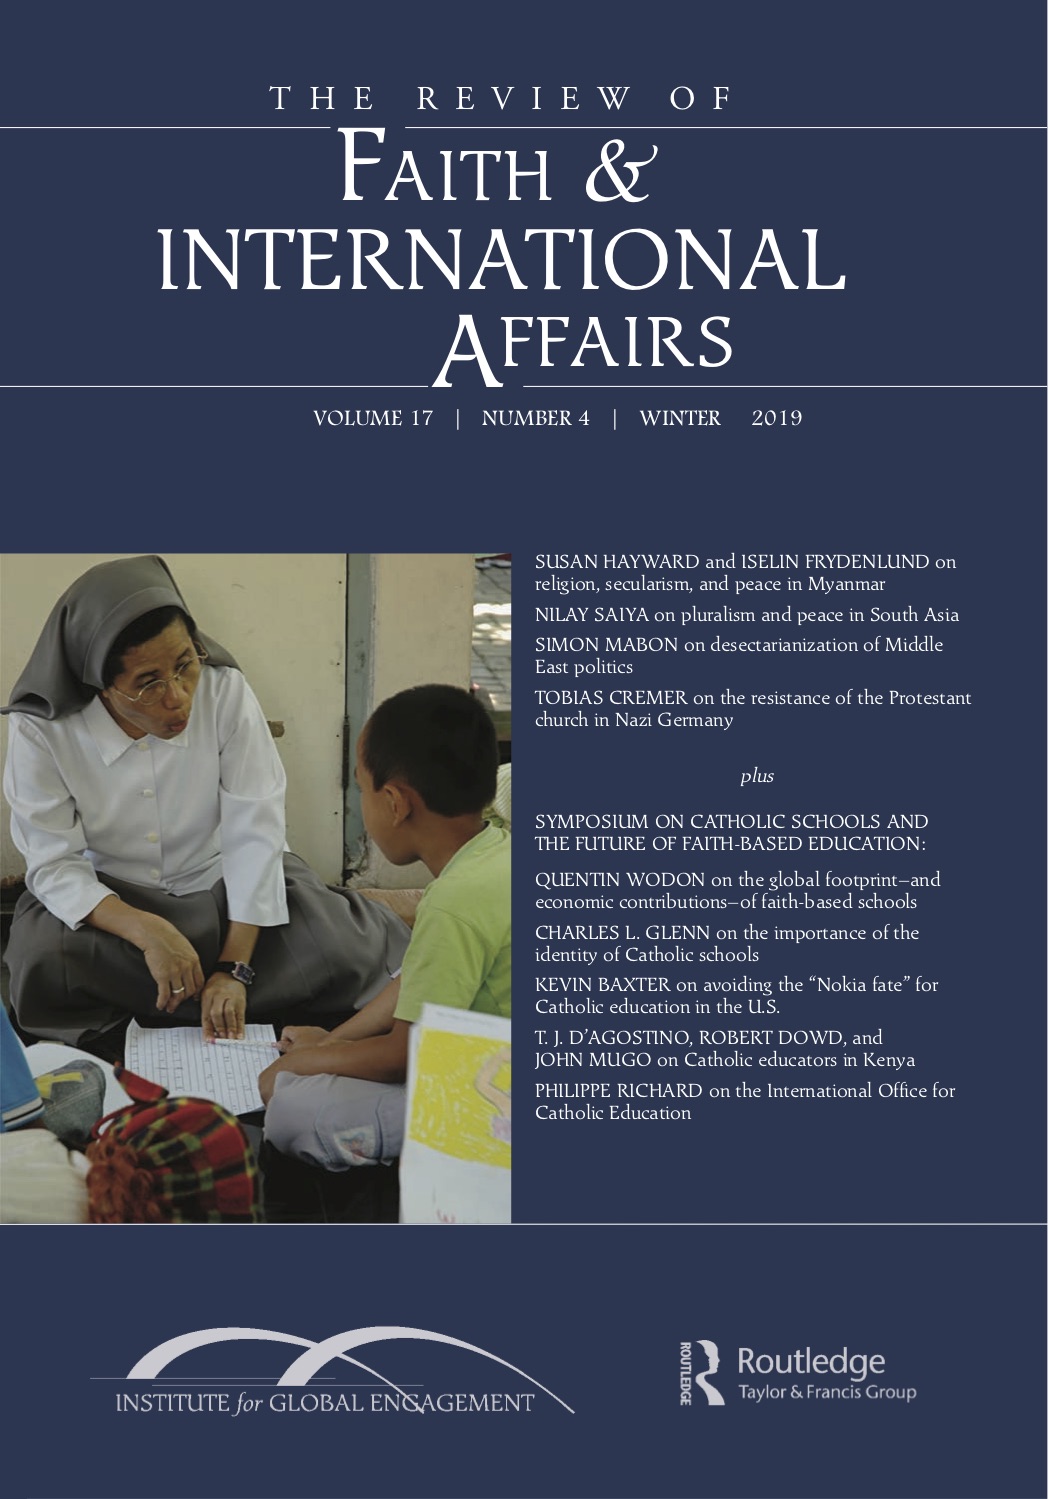 The Review of Faith & International Affairs (2019)